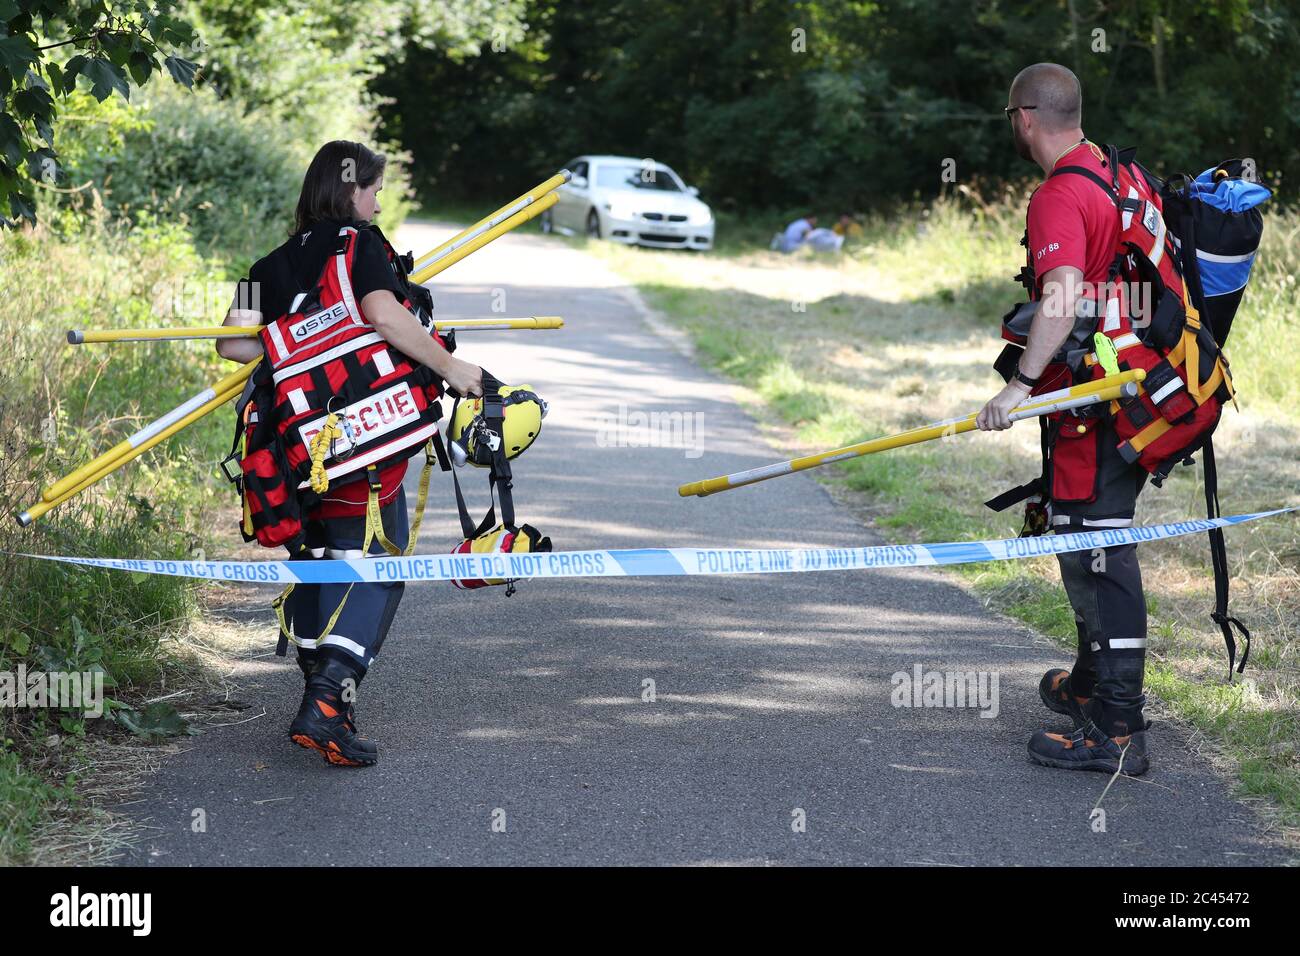 Members of a search and rescue team make heir way to Odney Weir near Cookham in Berkshire amid reports a man is missing after going into the water. Stock Photo